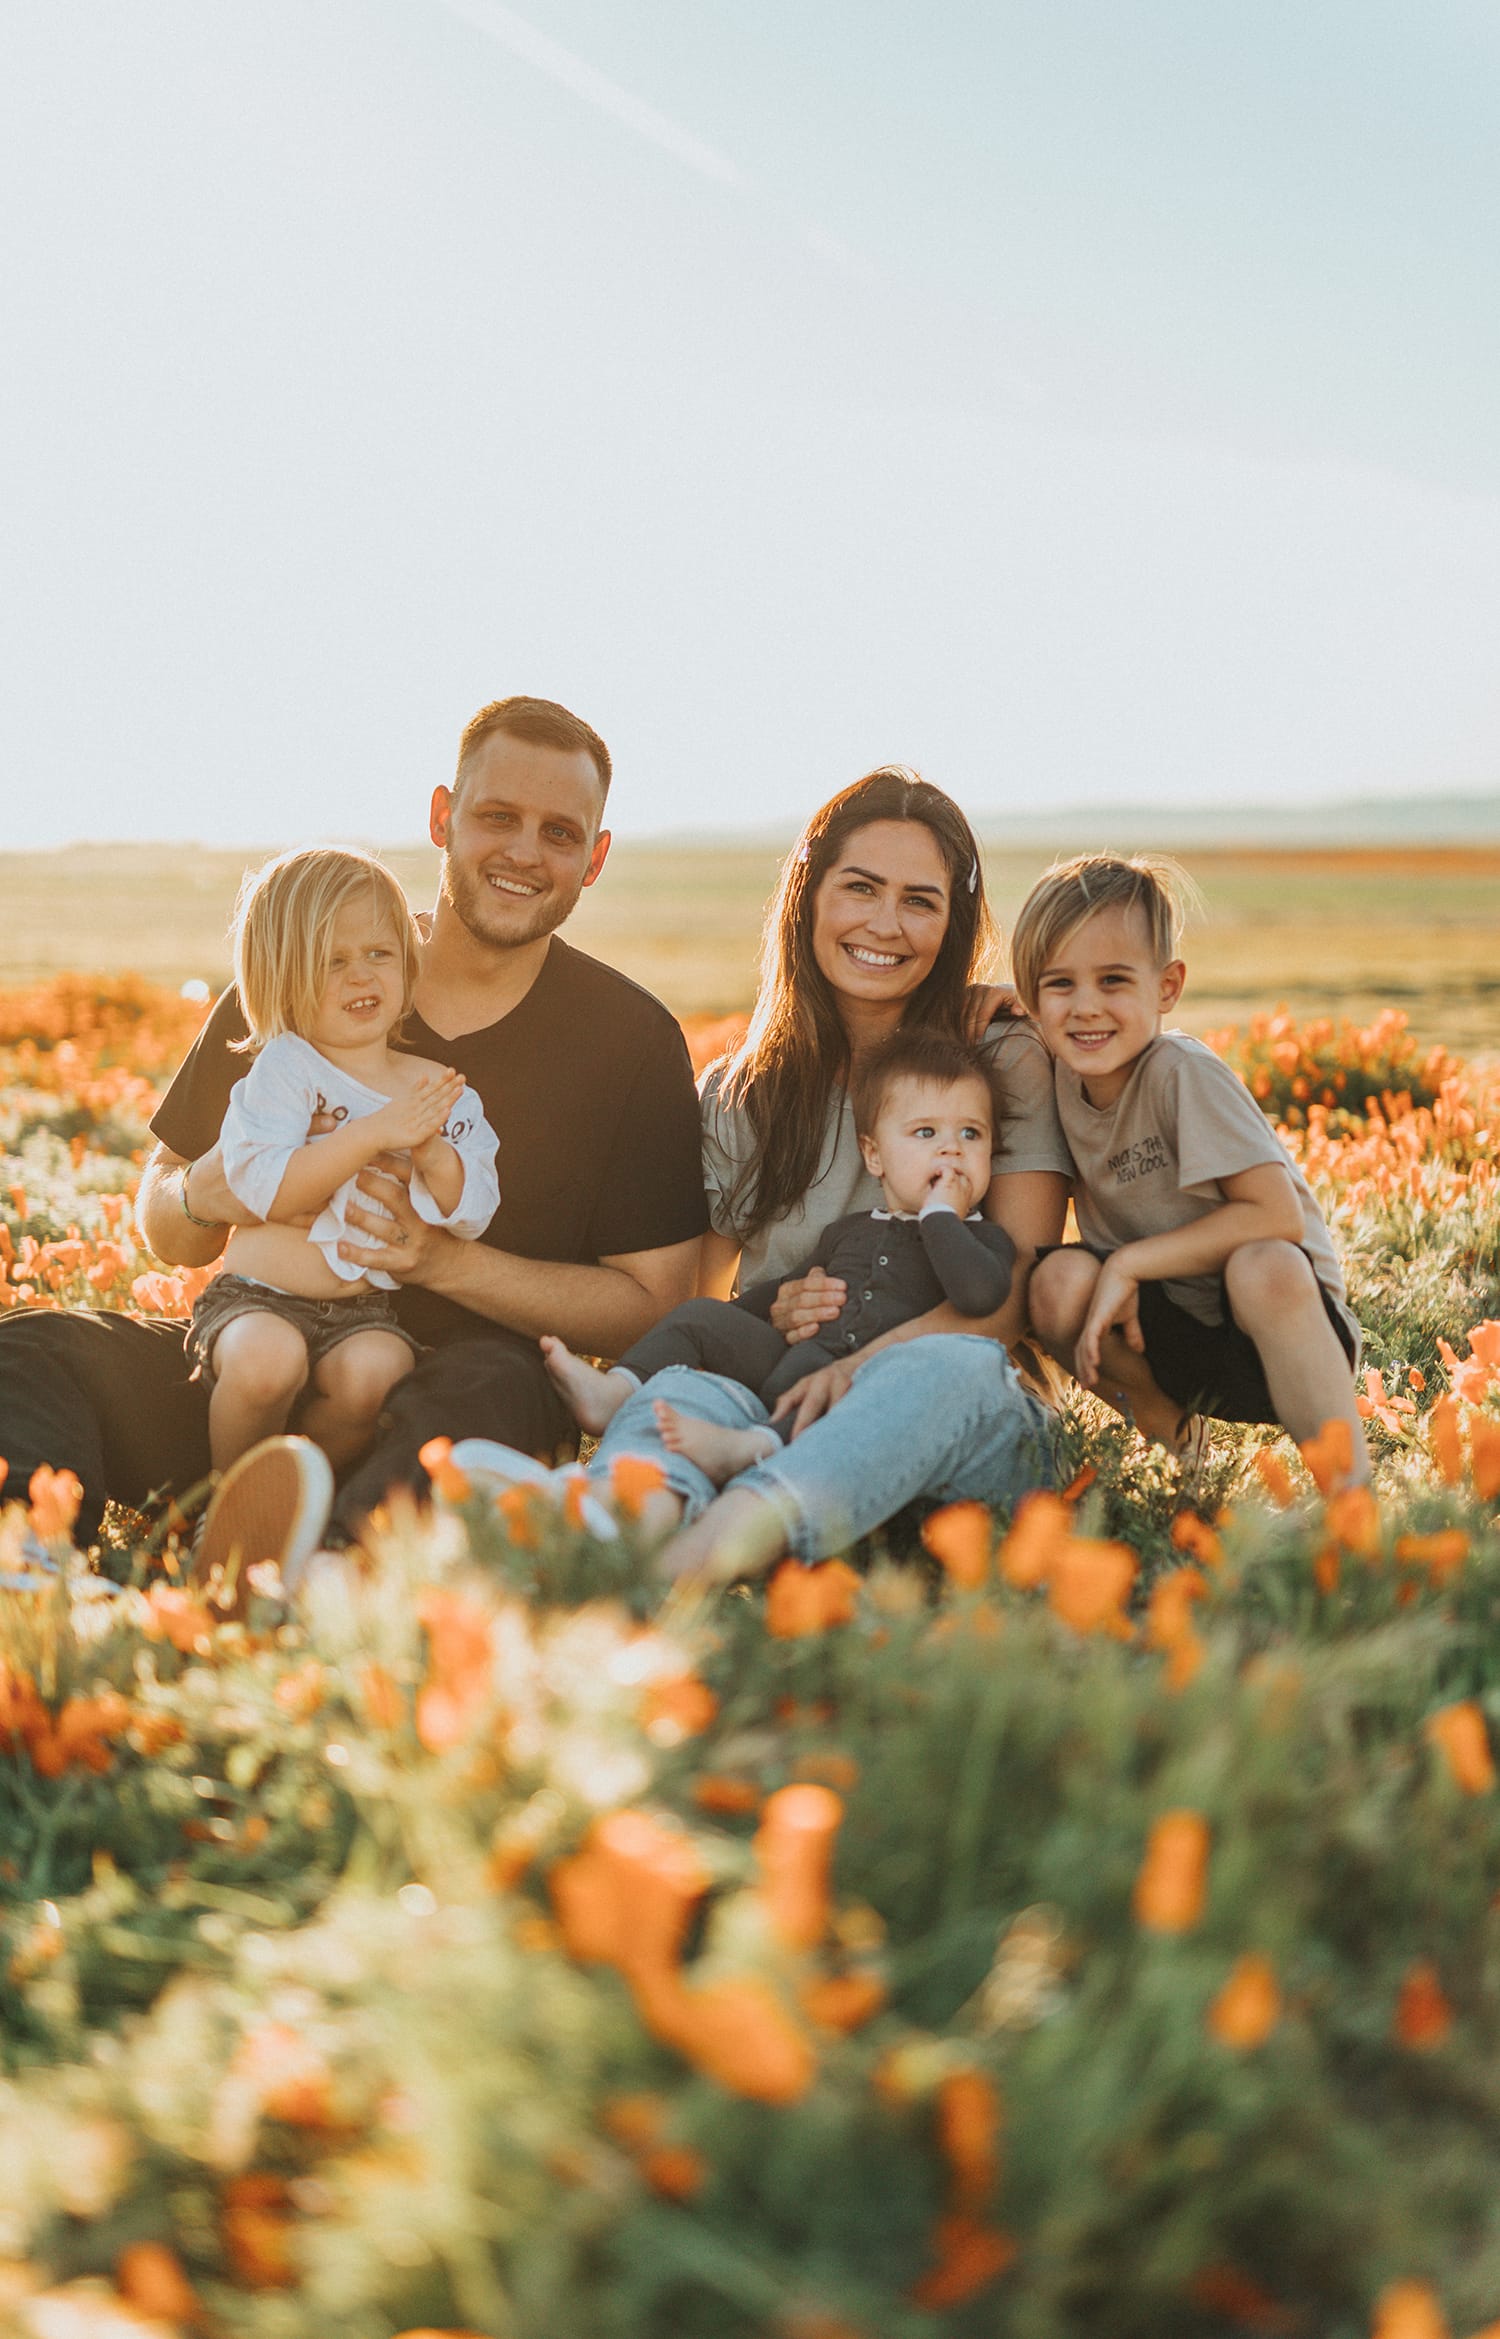 Family Photoshoot Ideas You Need to Try